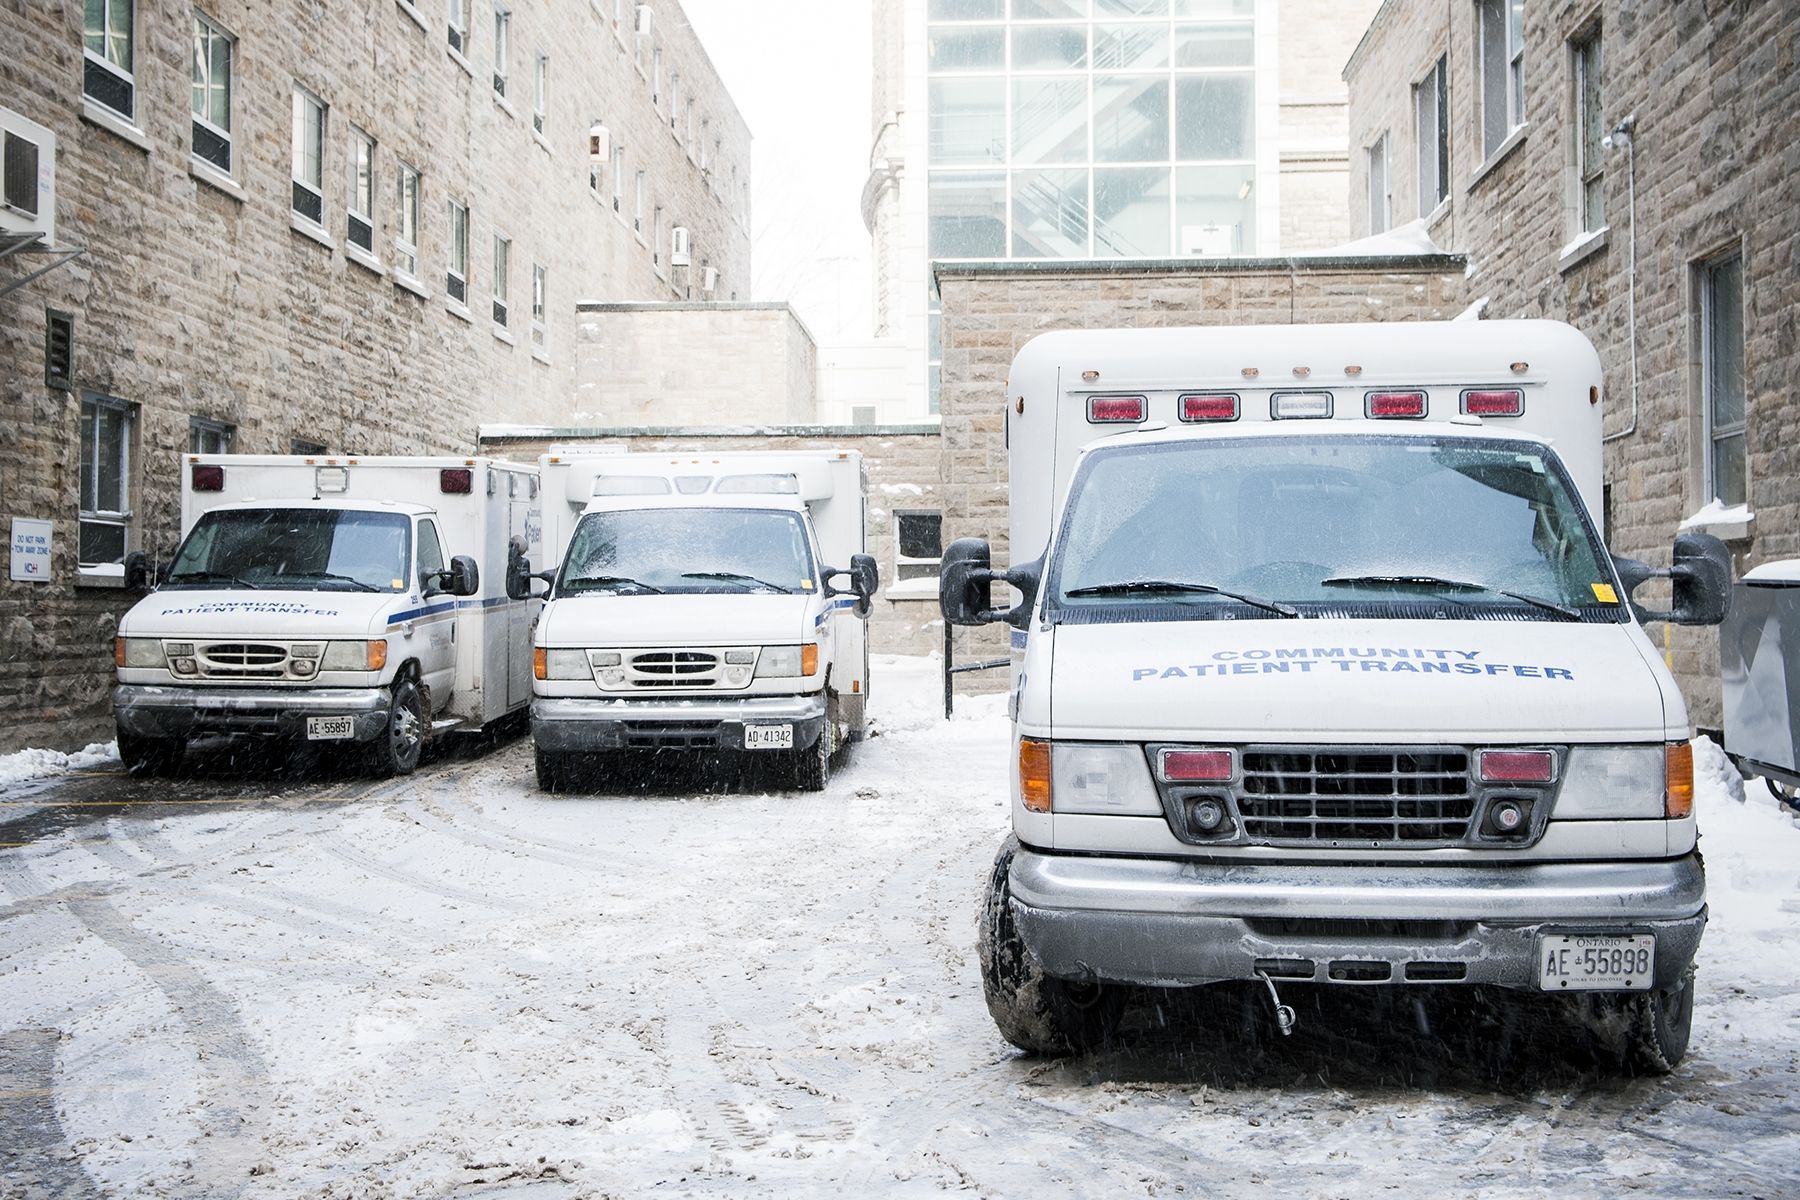 A few vehicles from the Community Patient Transfer Group parked at KGH to facilitate non-urgent patient transfers.